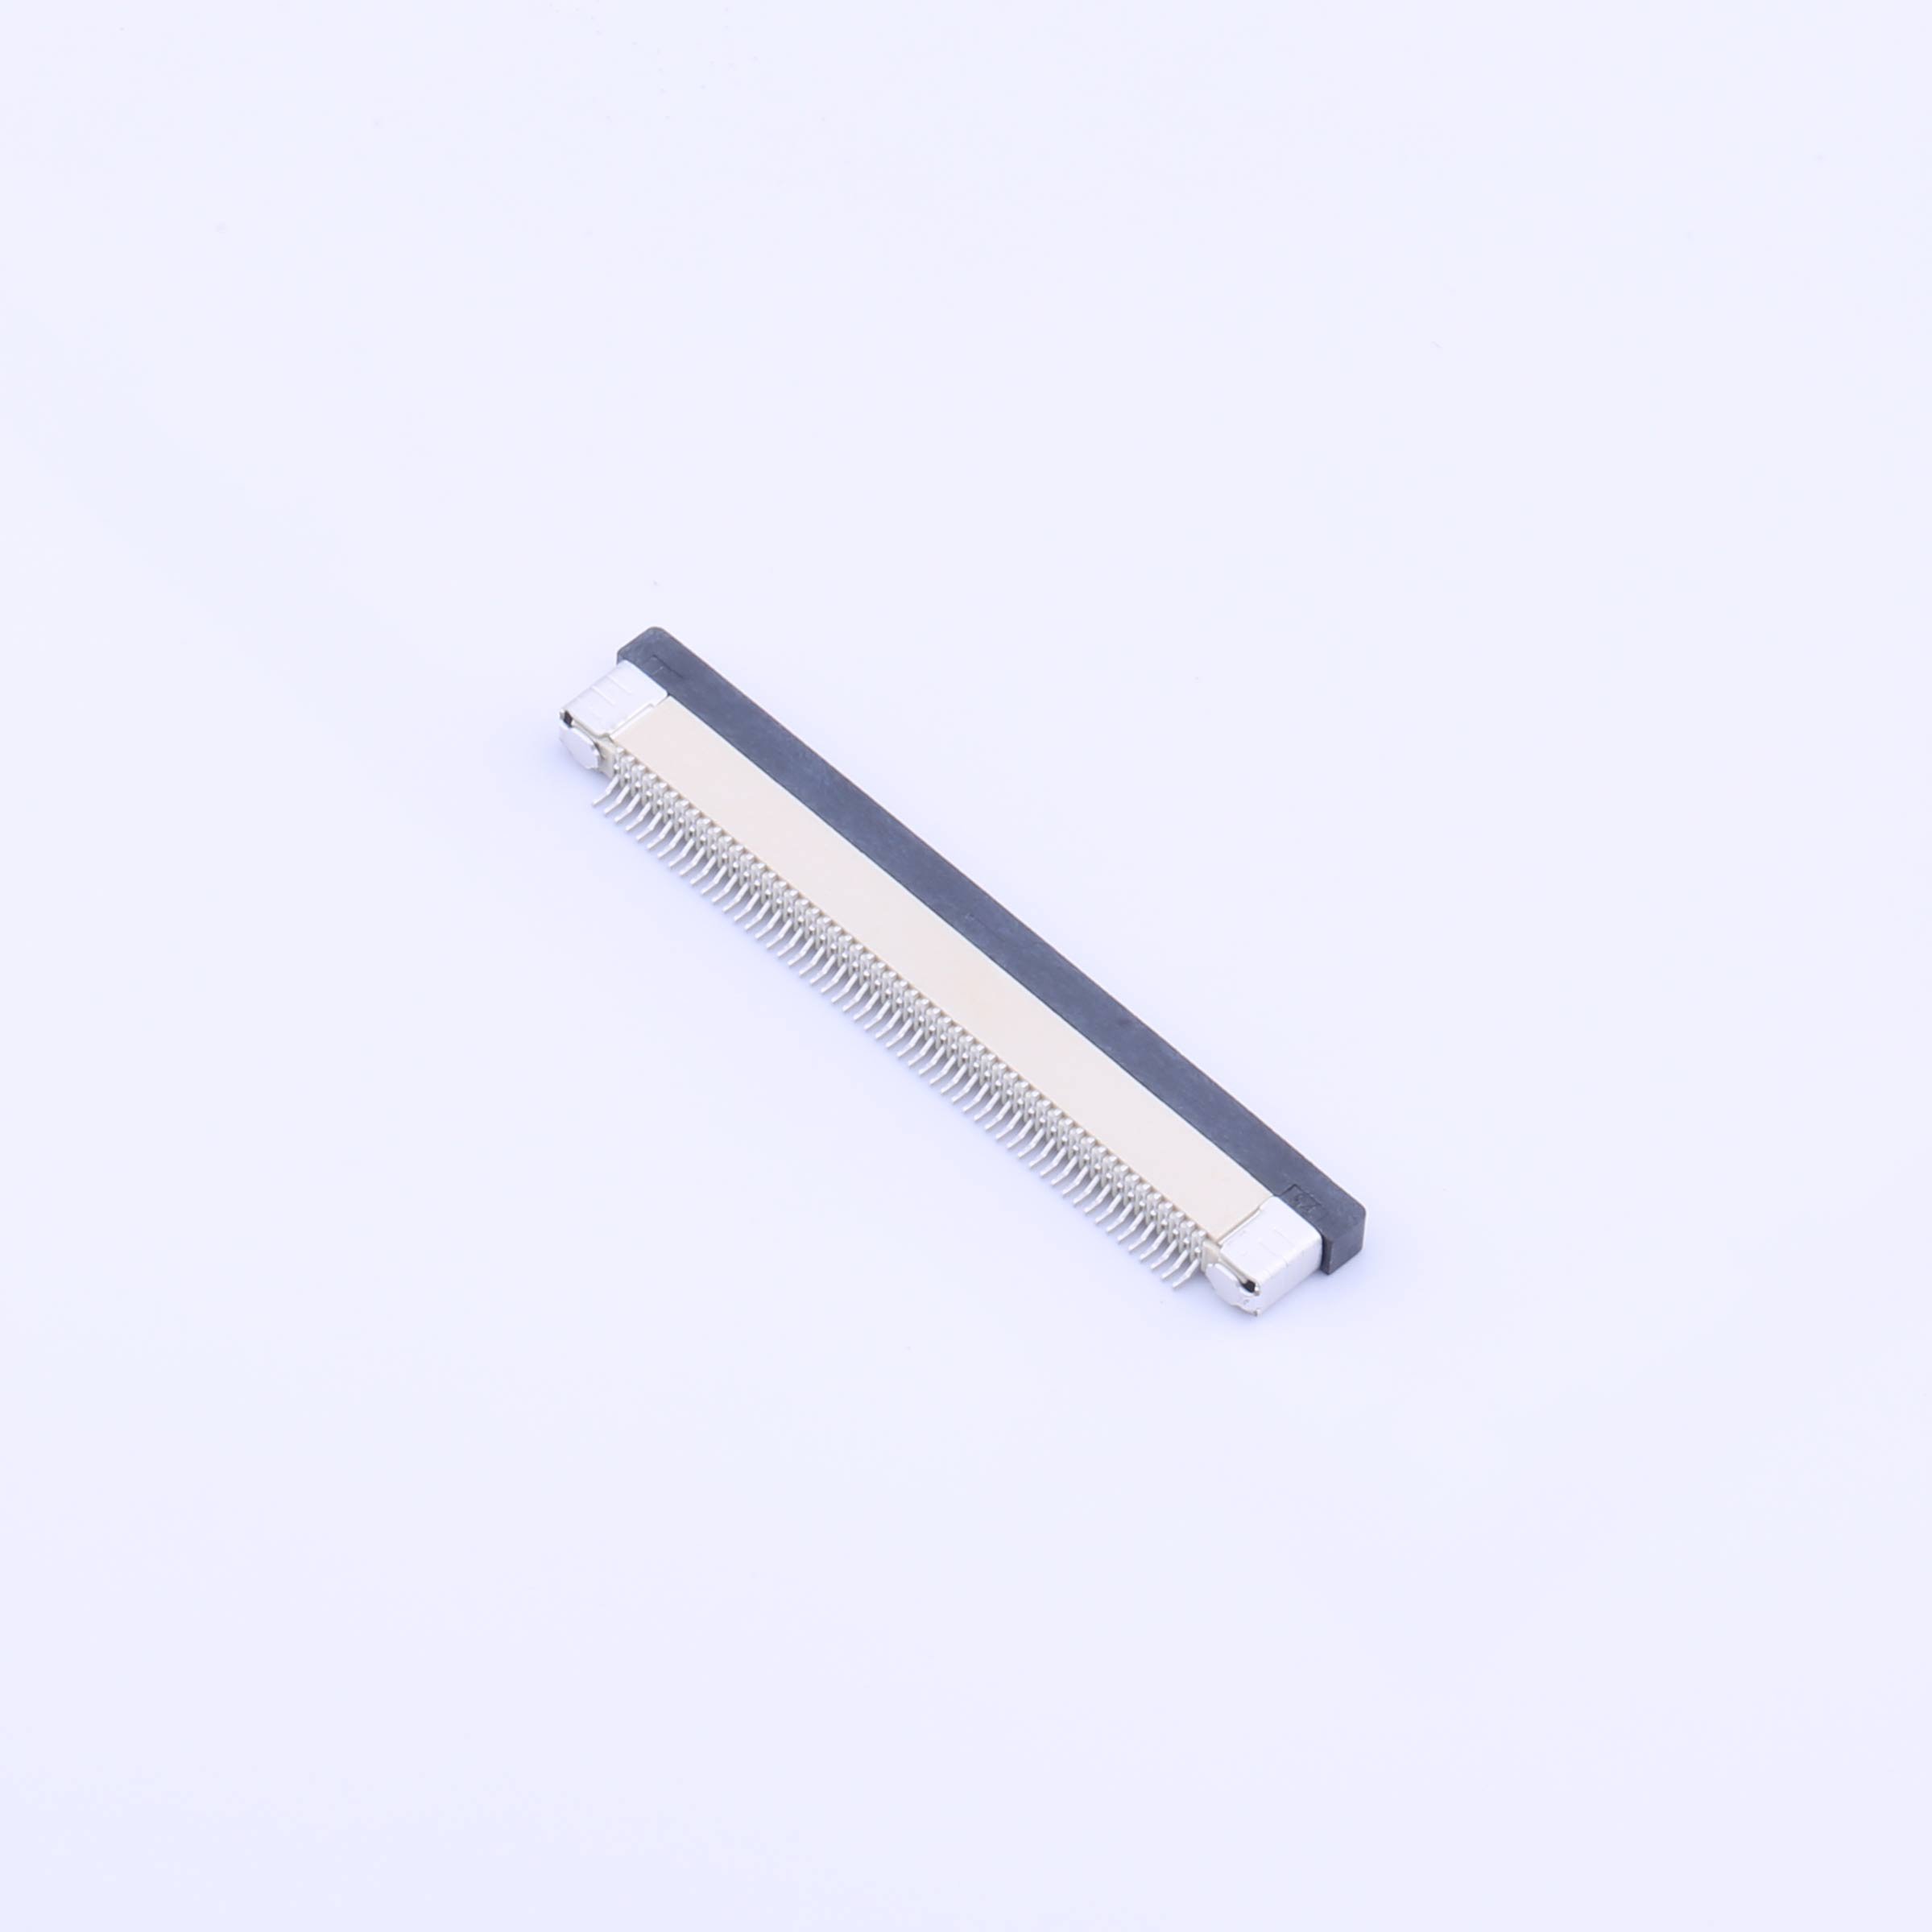 Kinghelm 0.5mm Pitch FPC FFC Connector 54P Height 2.0mm Drawer type lower connection Contact SMT FPC Connector